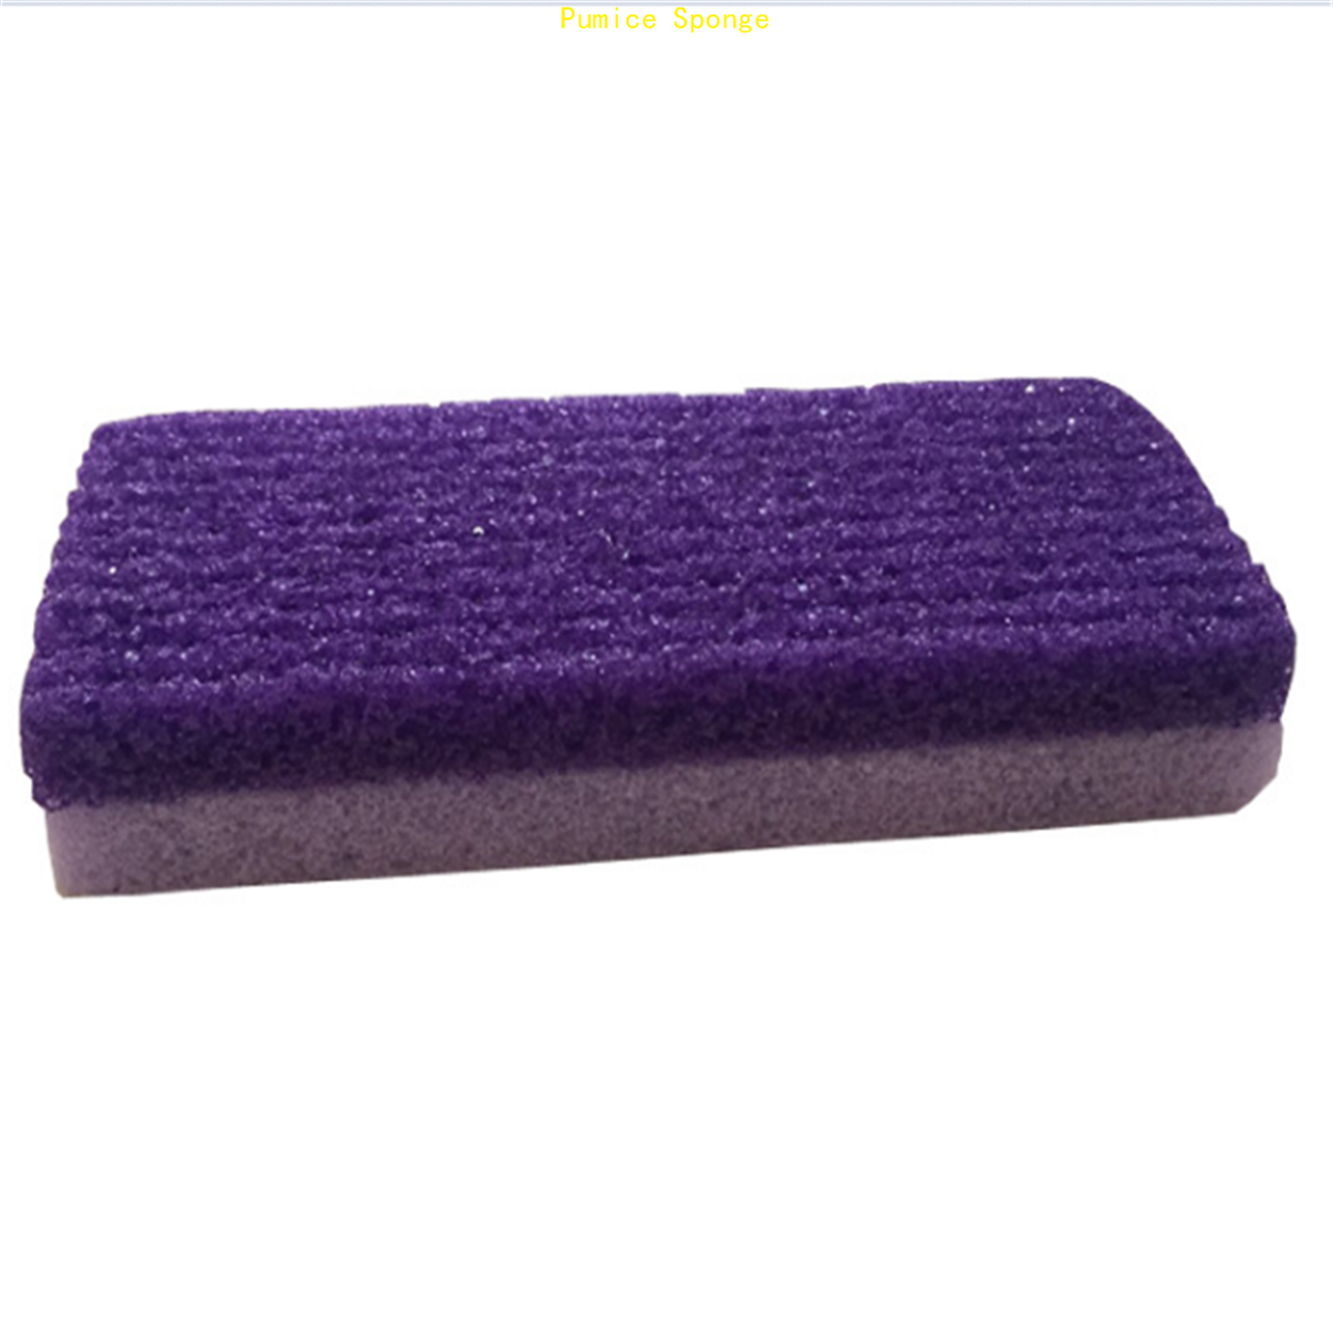 nail salon supply 2 in 1 pumice sponges